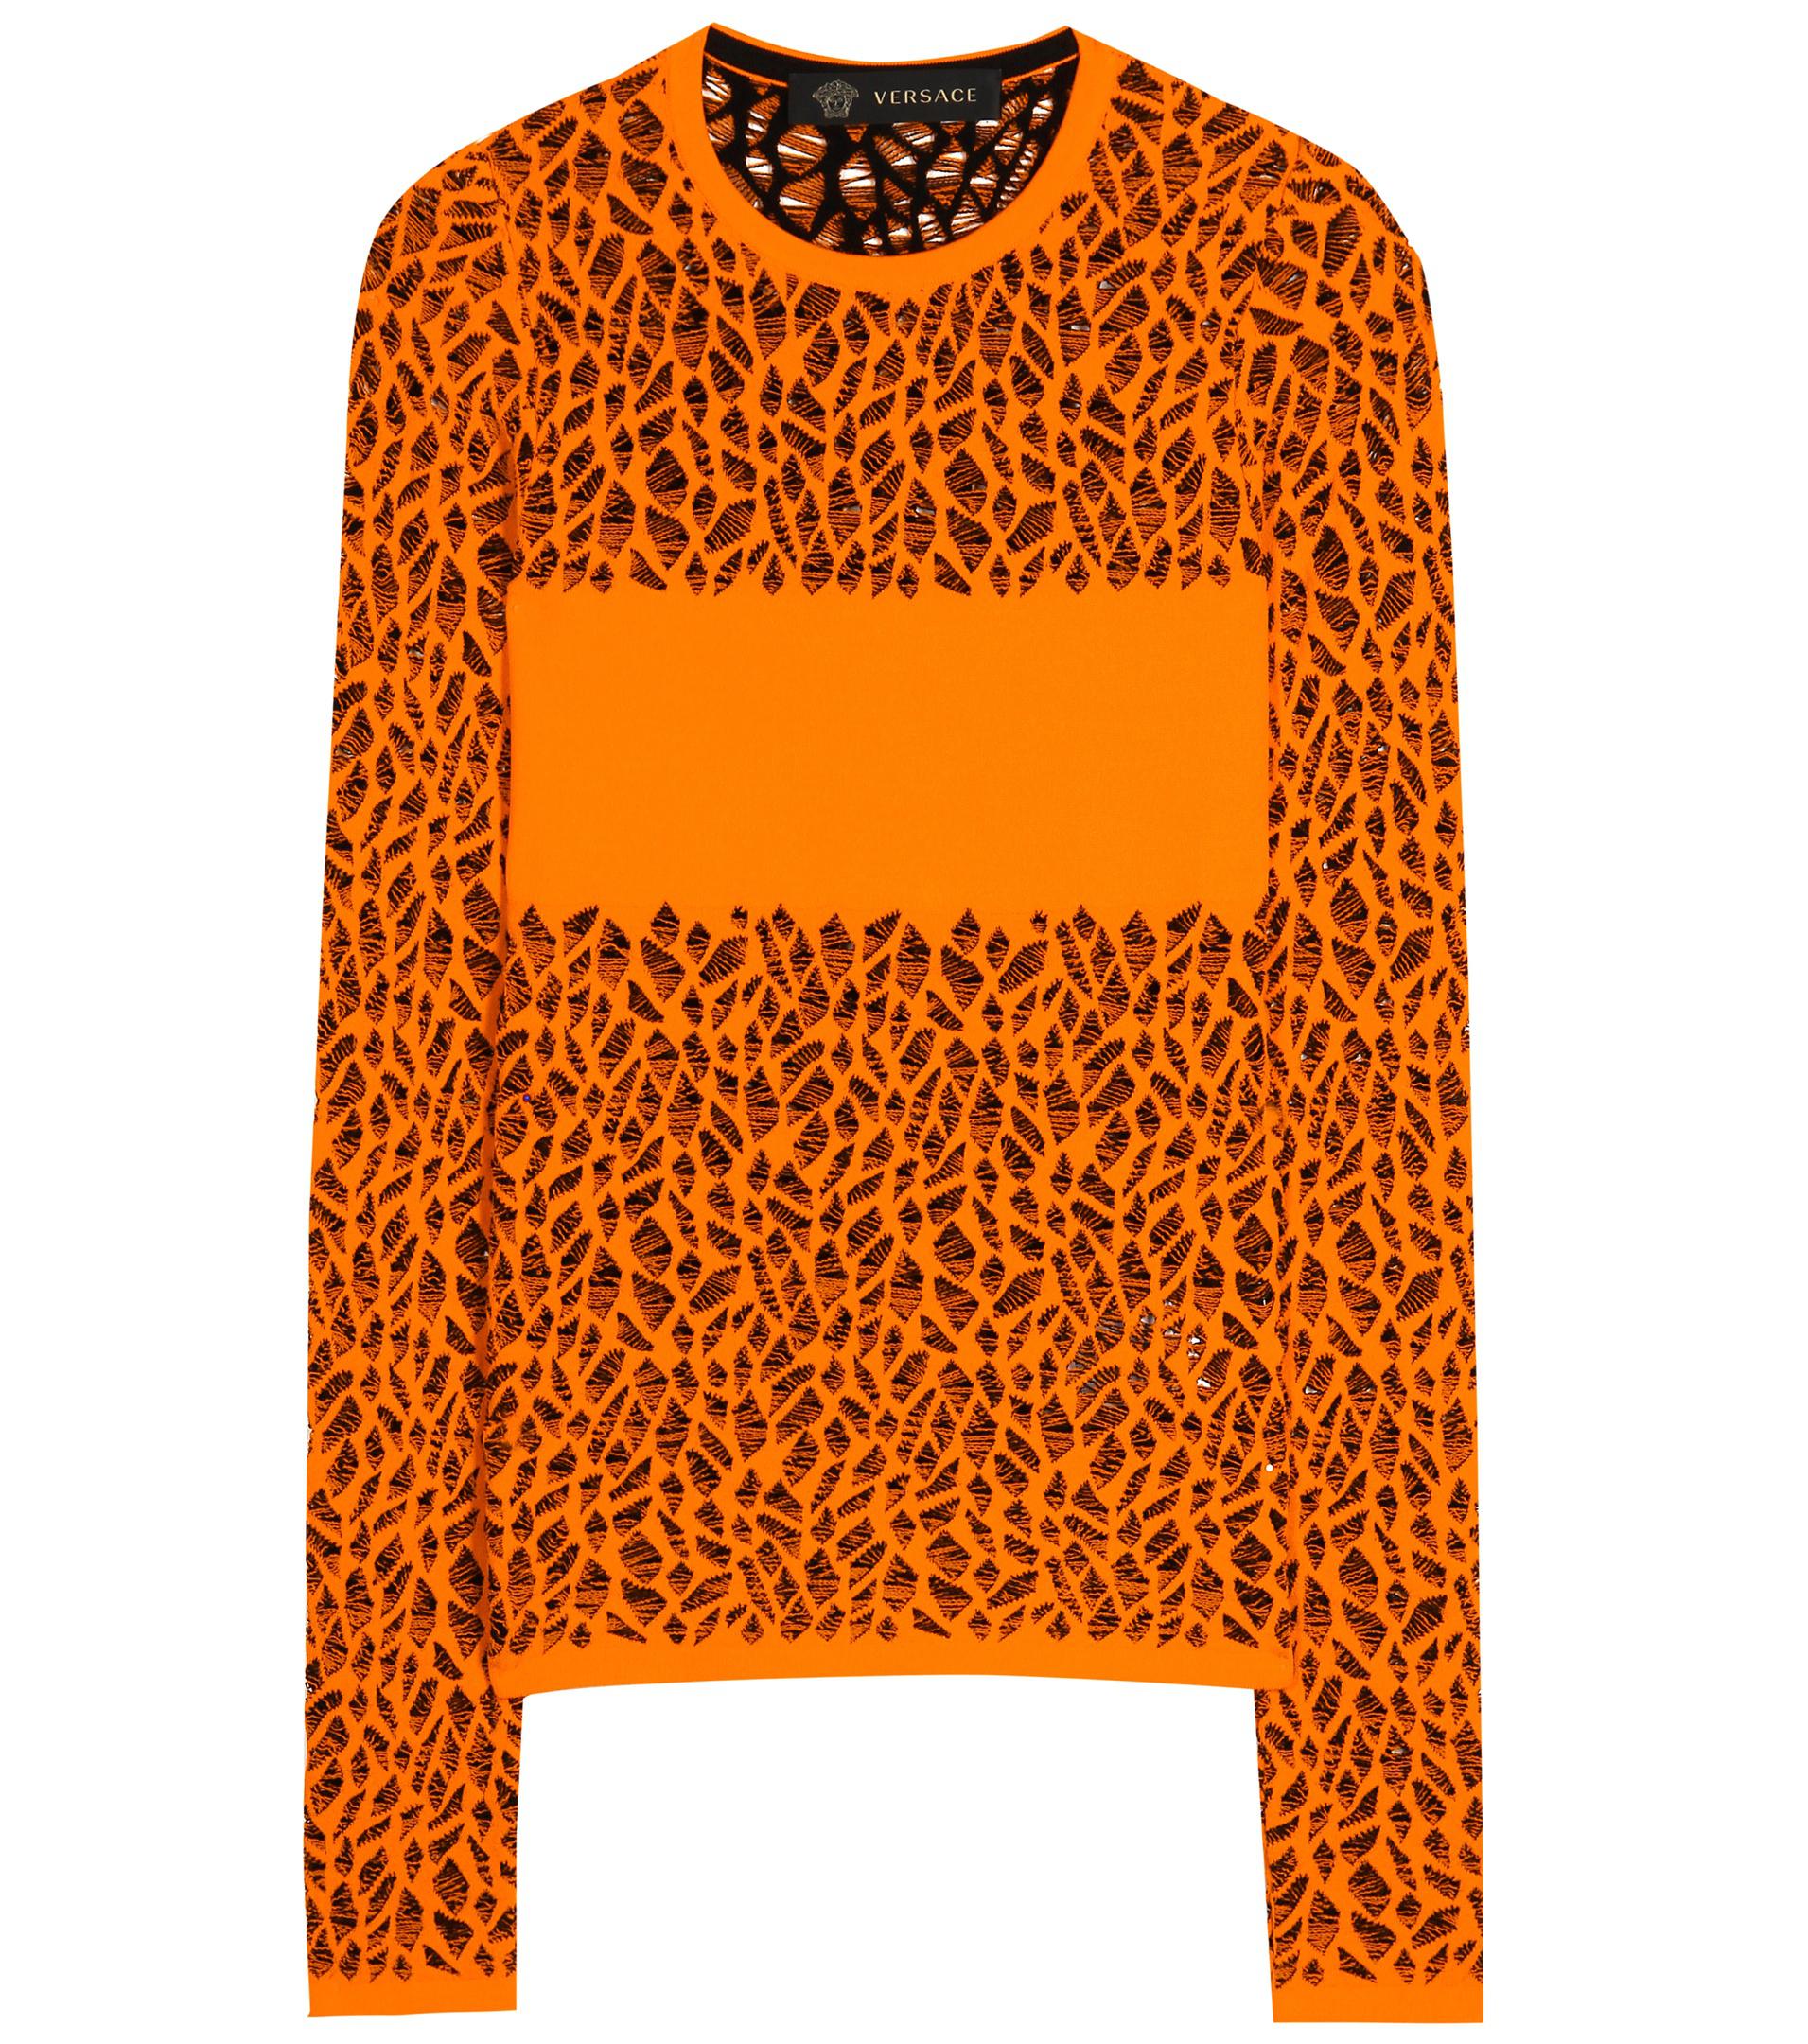 Lyst - Versace Knitted Sweater in Orange